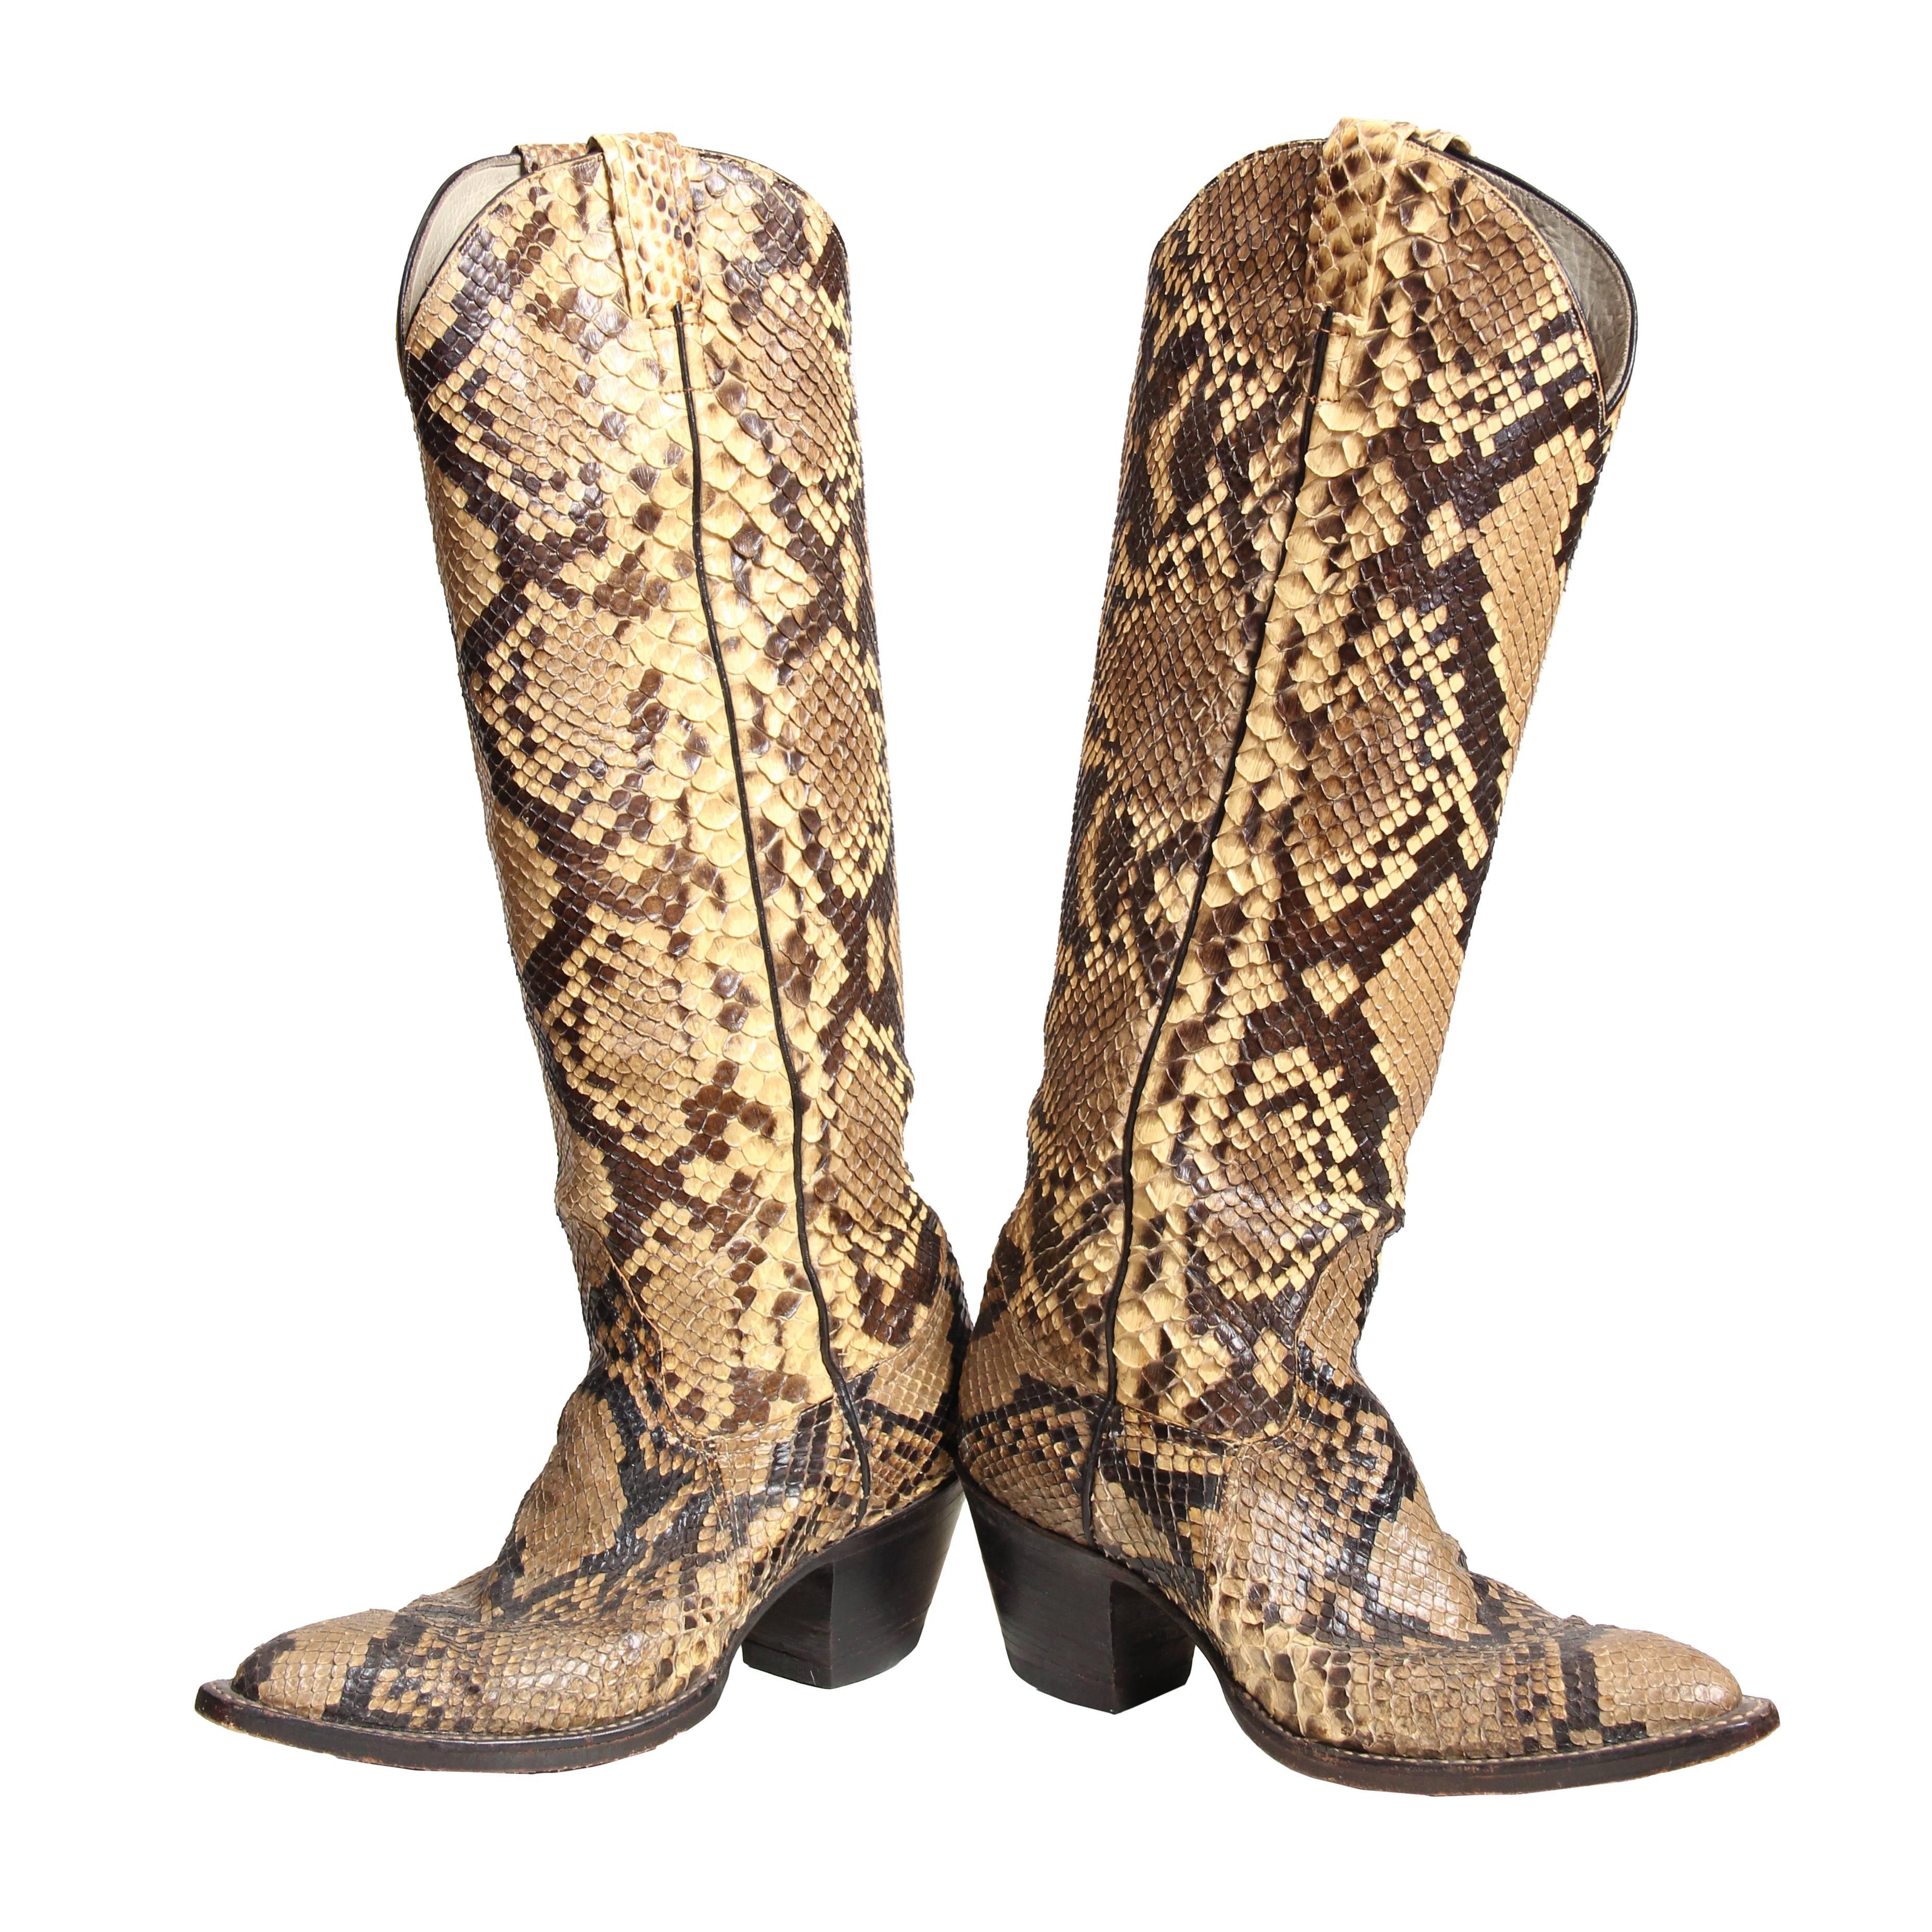 Tall Snakeskin Cowboy Boots from Larry Mahan